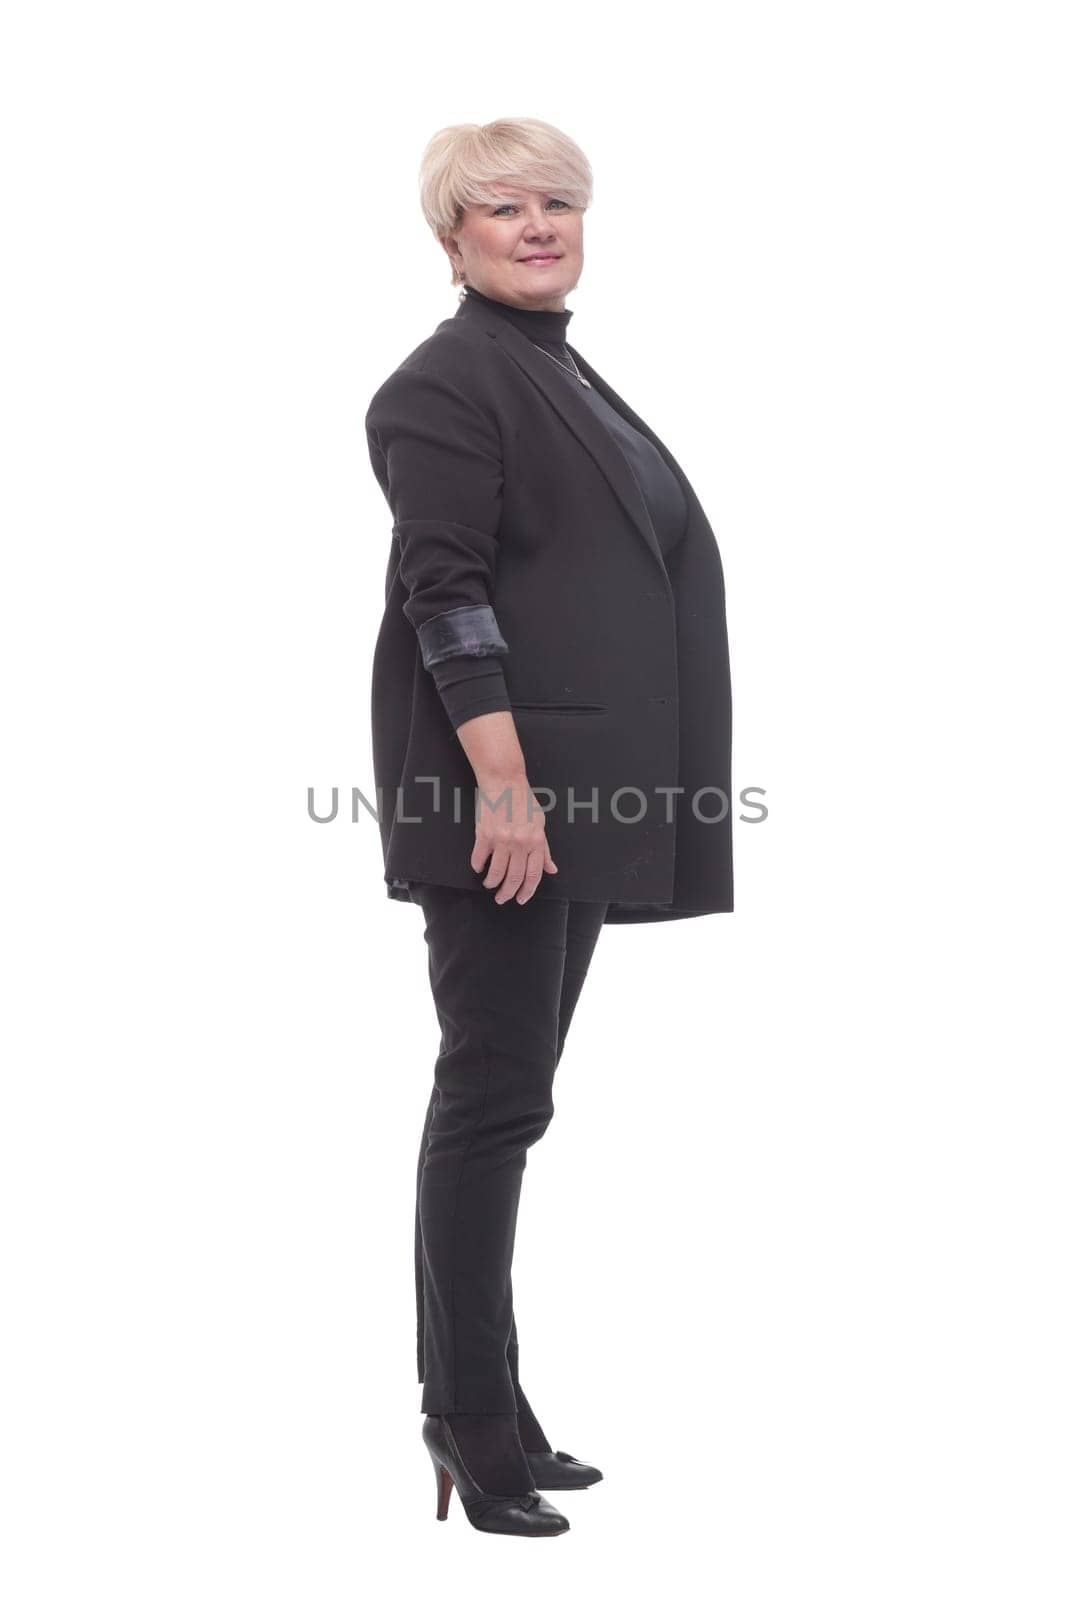 in full growth. attractive business woman in casual clothes. isolated on a white background.